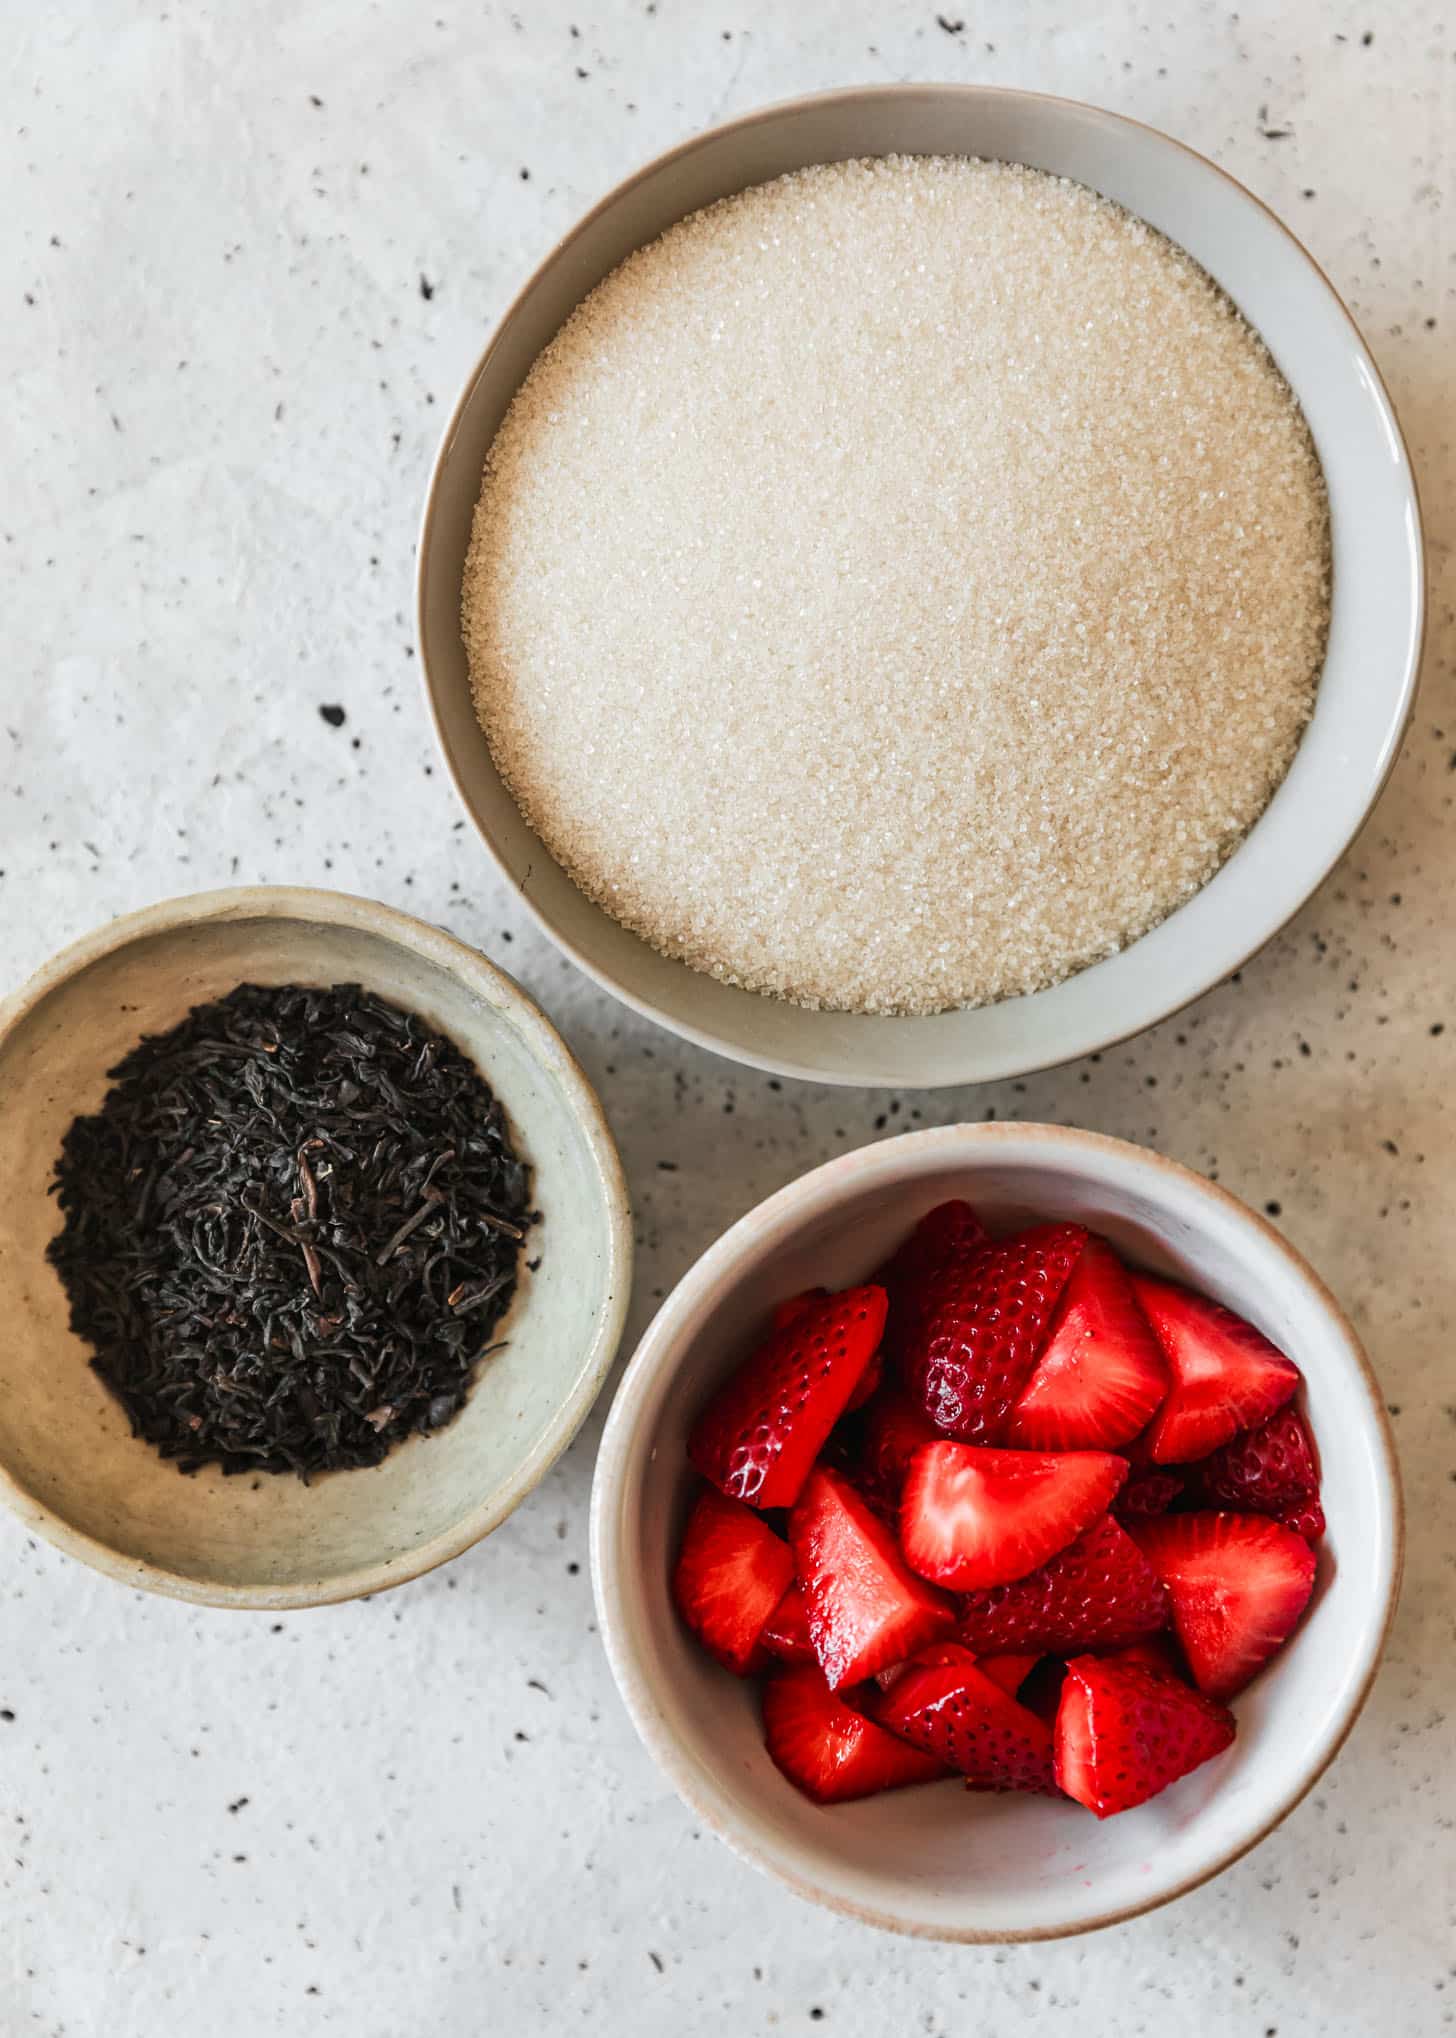 Three white bowls of sugar, black tea leaves, and strawberries on a white counter.